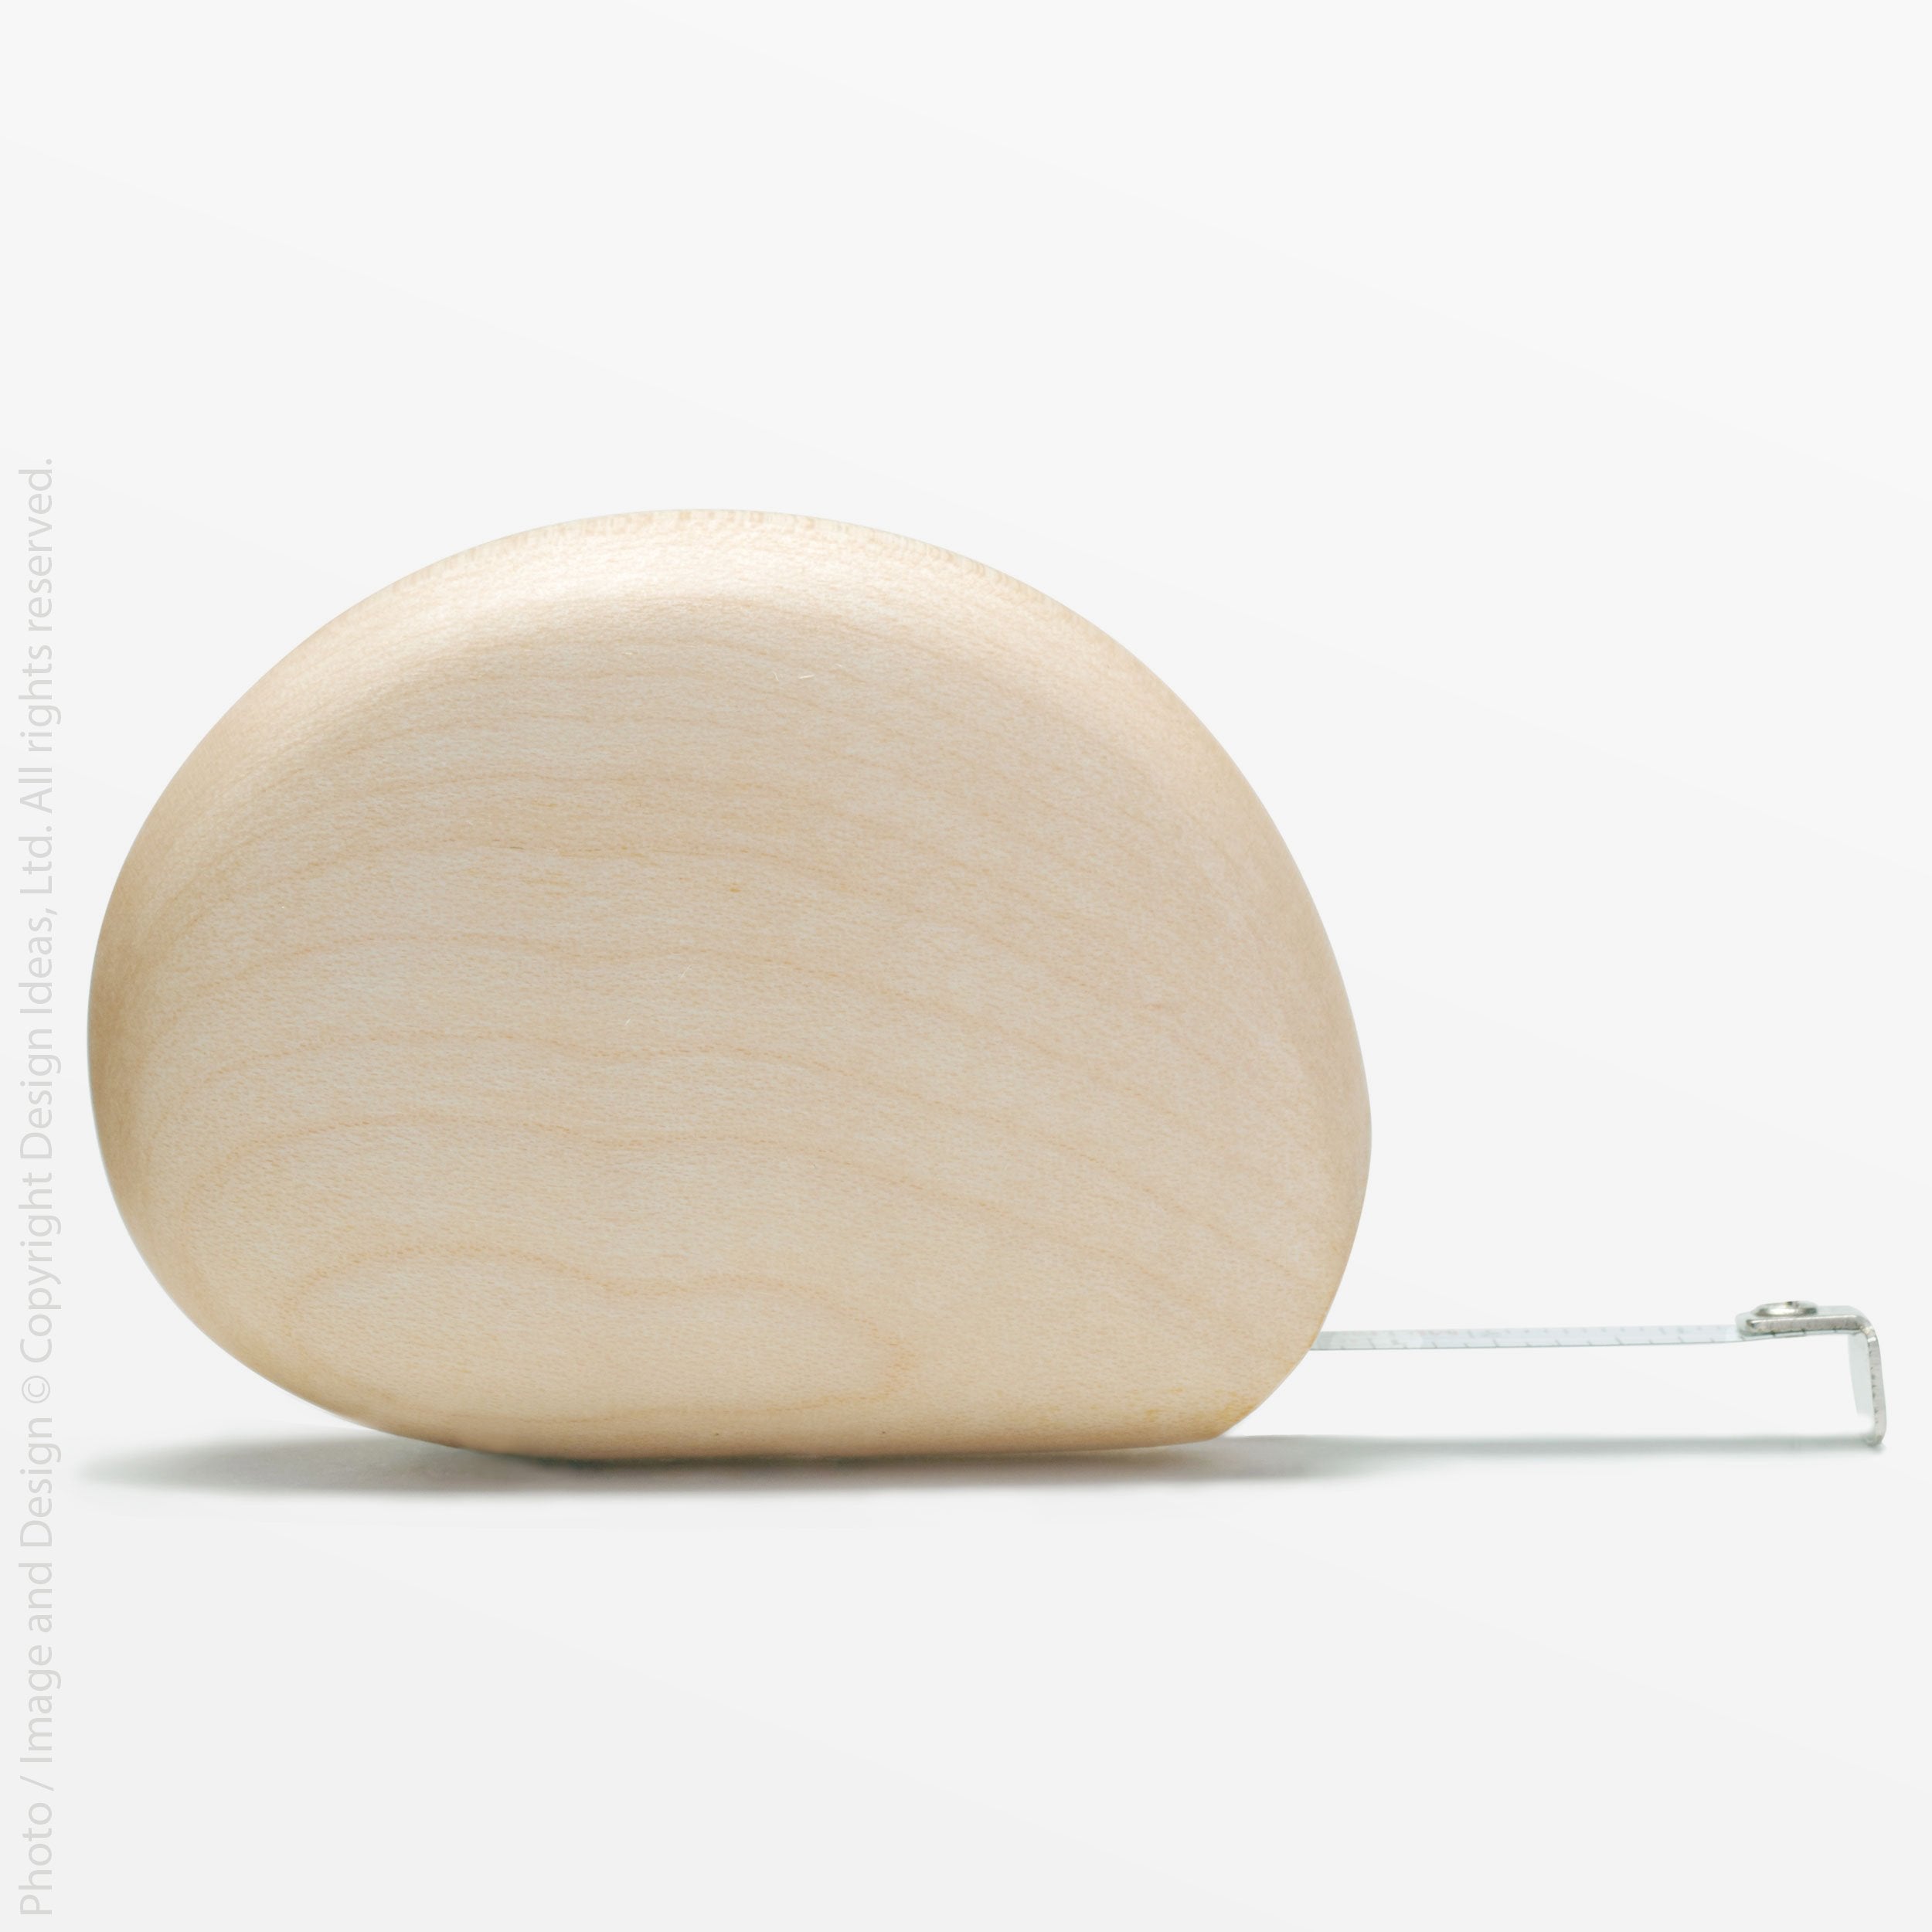 Upland Sycamore Tape Measure - Natural Color | Image 1 | From the Upland Collection | Masterfully created with natural sycamore for long lasting use | Available in natural color | texxture home